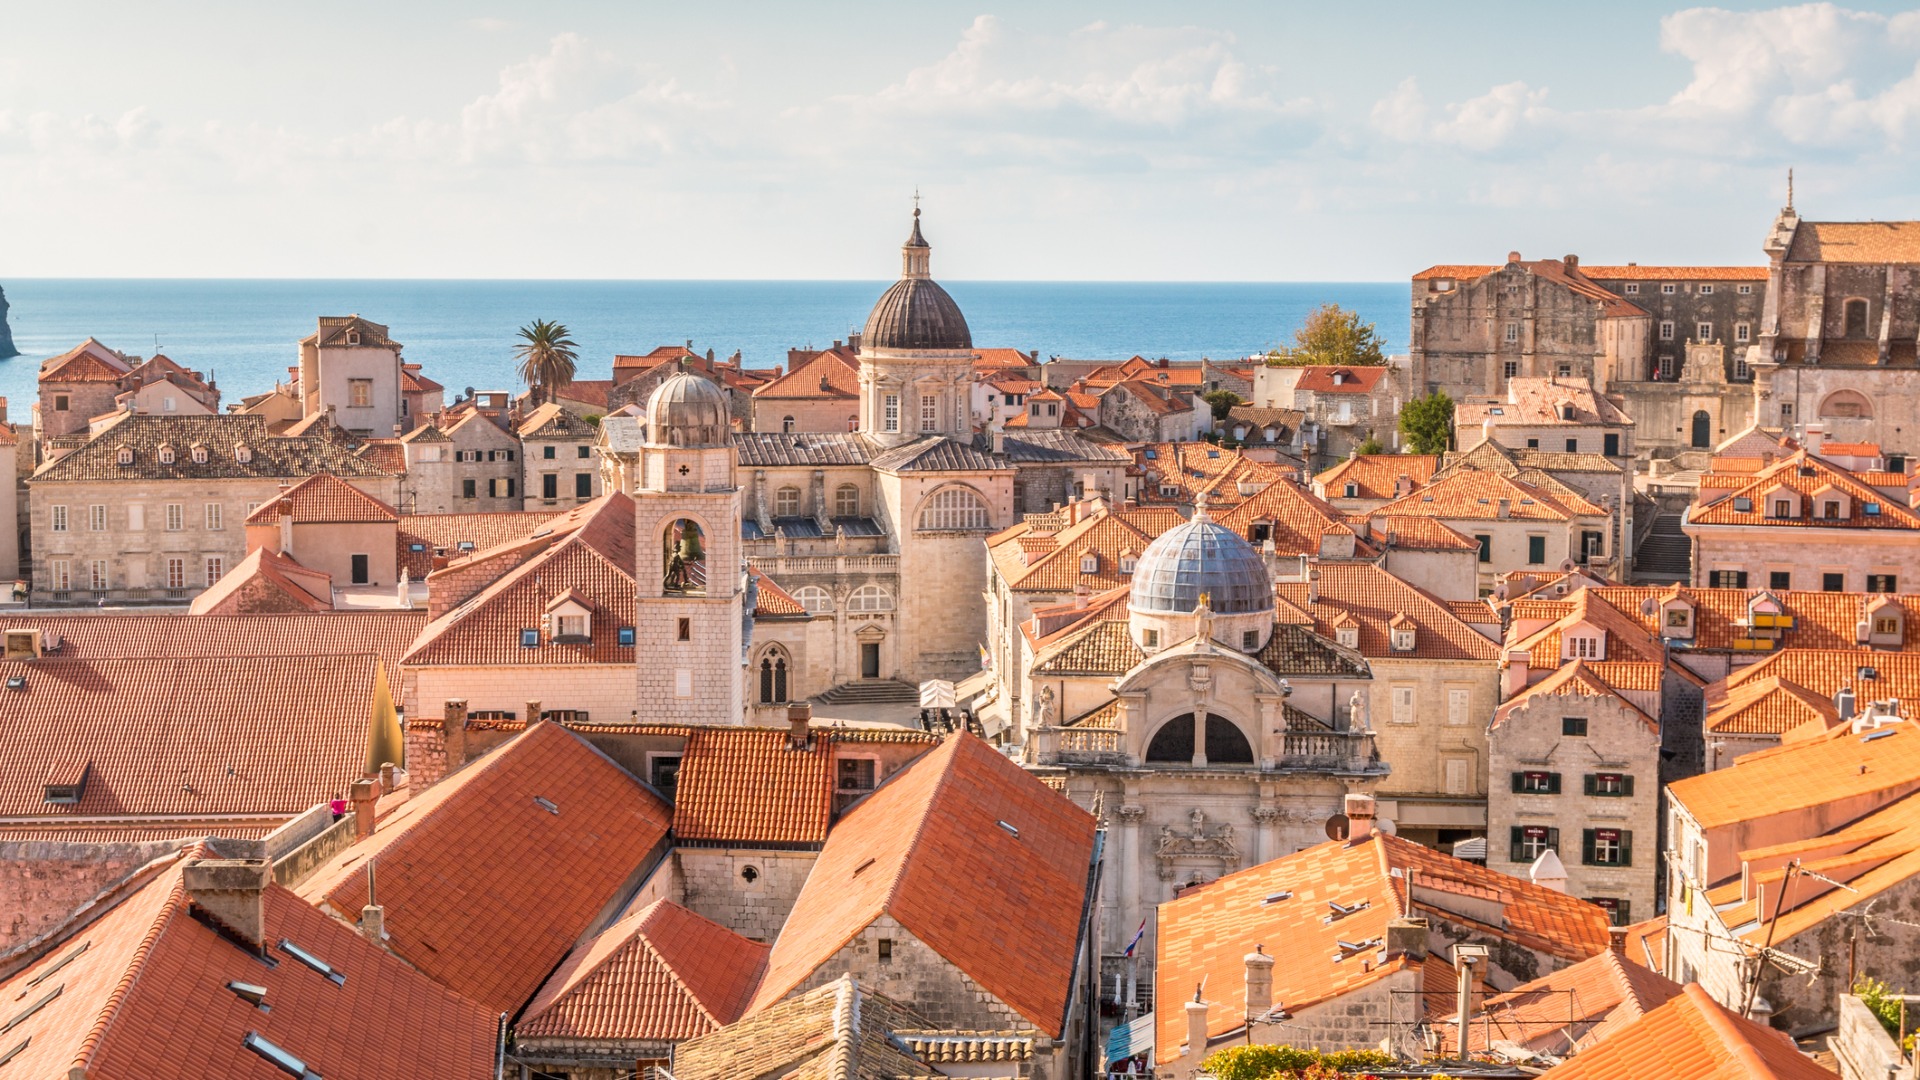 This image shows the red rooftops of Dubrovnik with the sea in the background.